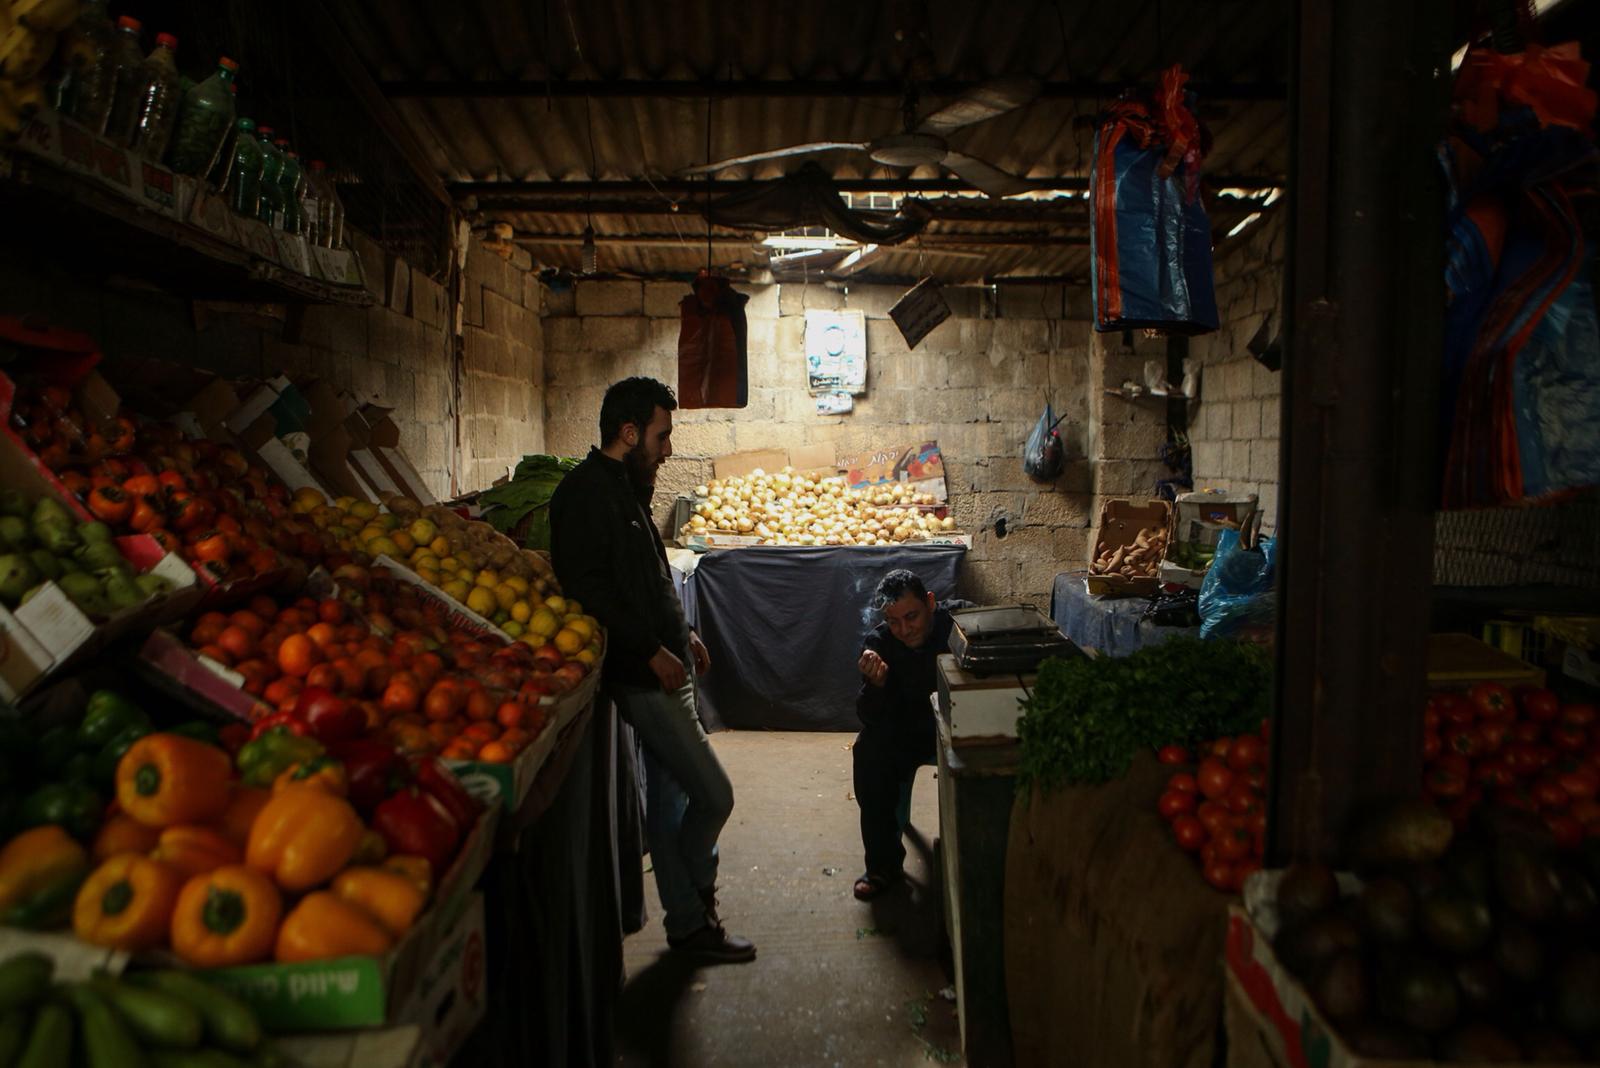 Palestinian businesses can only rely on light during the daylight hours (MEE/Mohammed al-Hajjar)